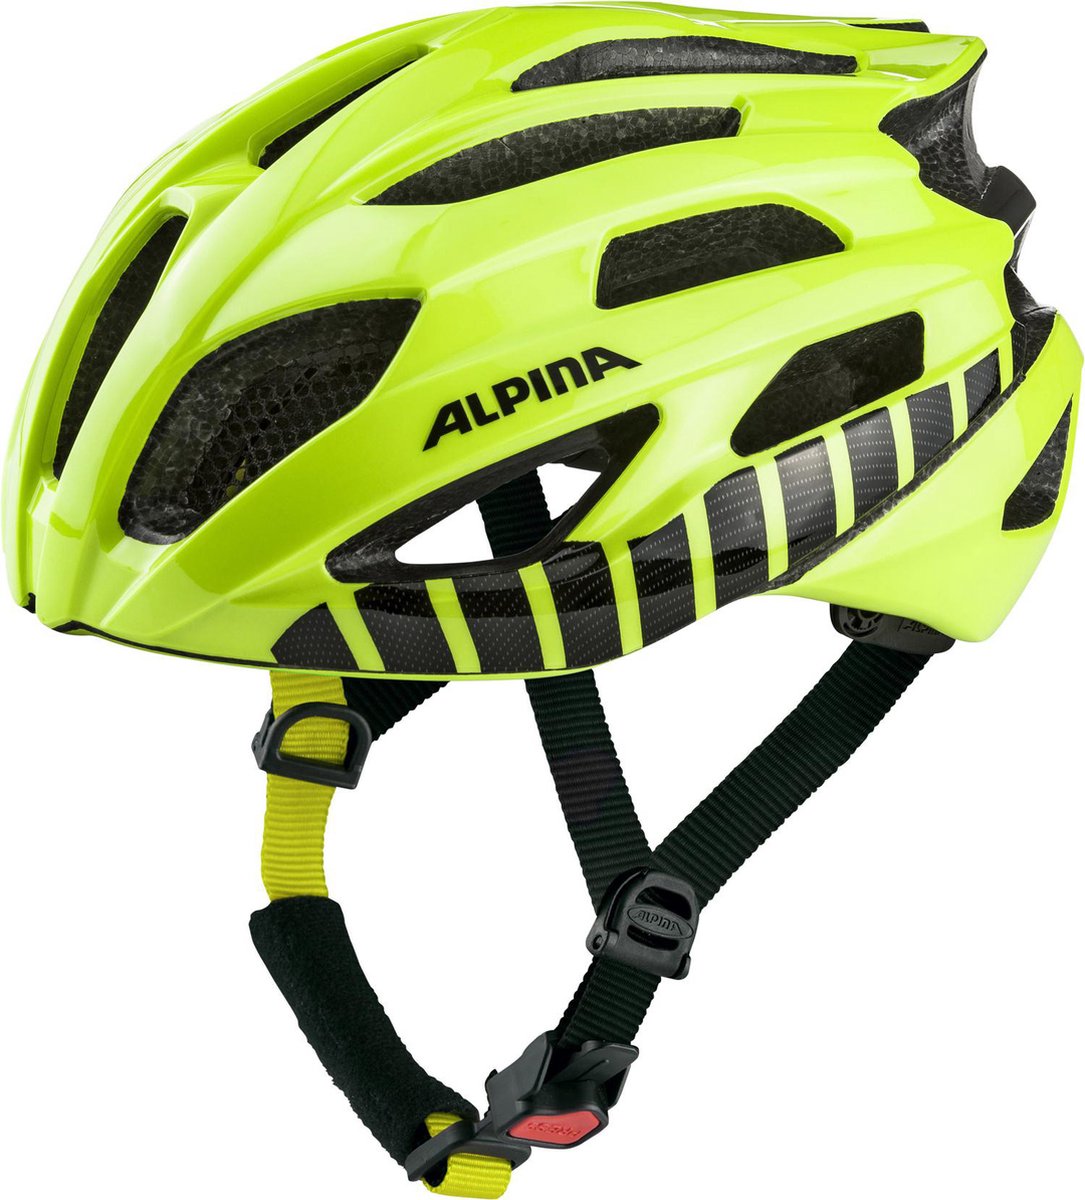 Alpina helm Fedaia be visible 53-58cm